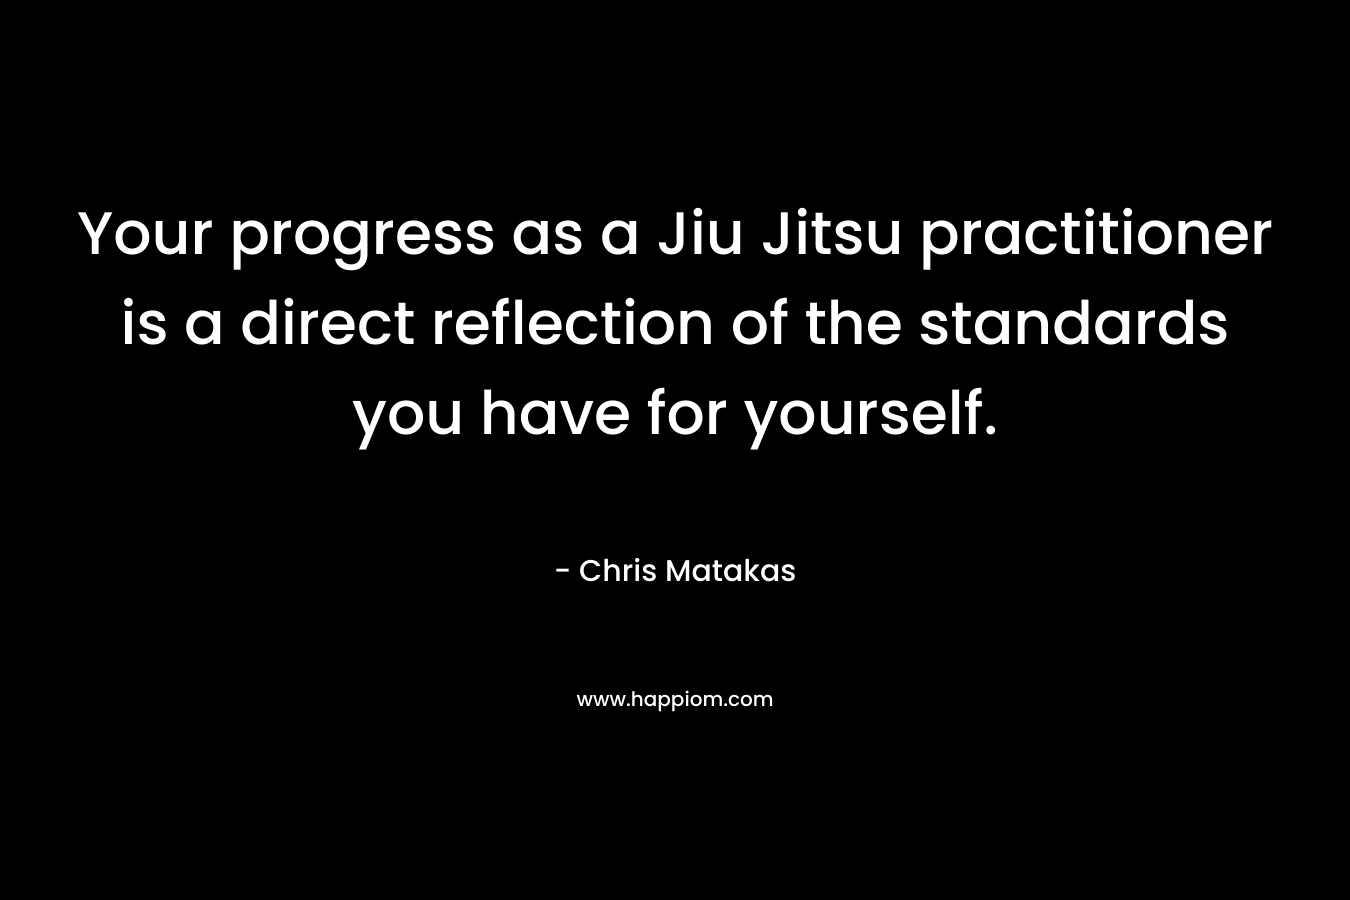 Your progress as a Jiu Jitsu practitioner is a direct reflection of the standards you have for yourself. – Chris Matakas